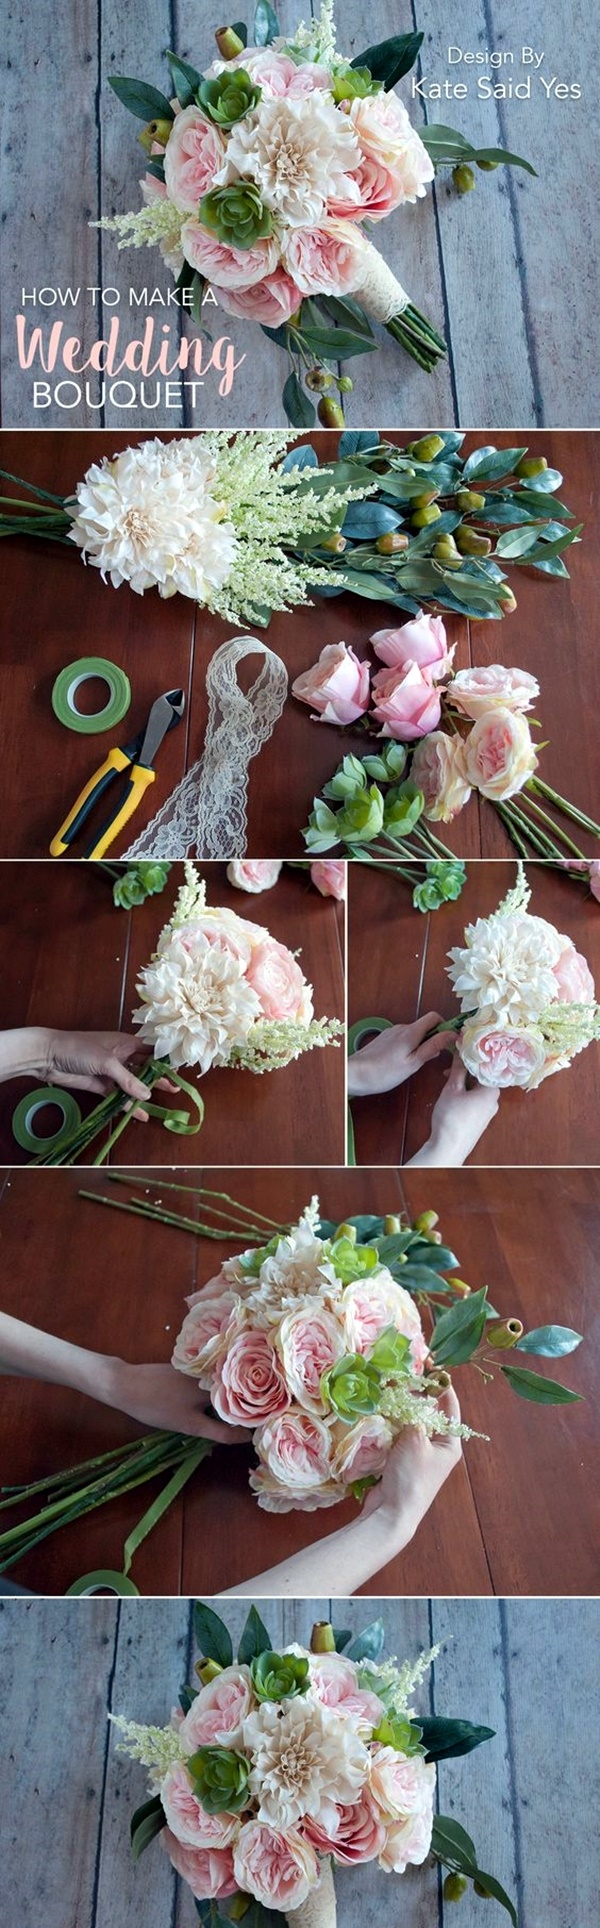 30 DIY Weddings Ideas On A Budget To Make It Unforgettable